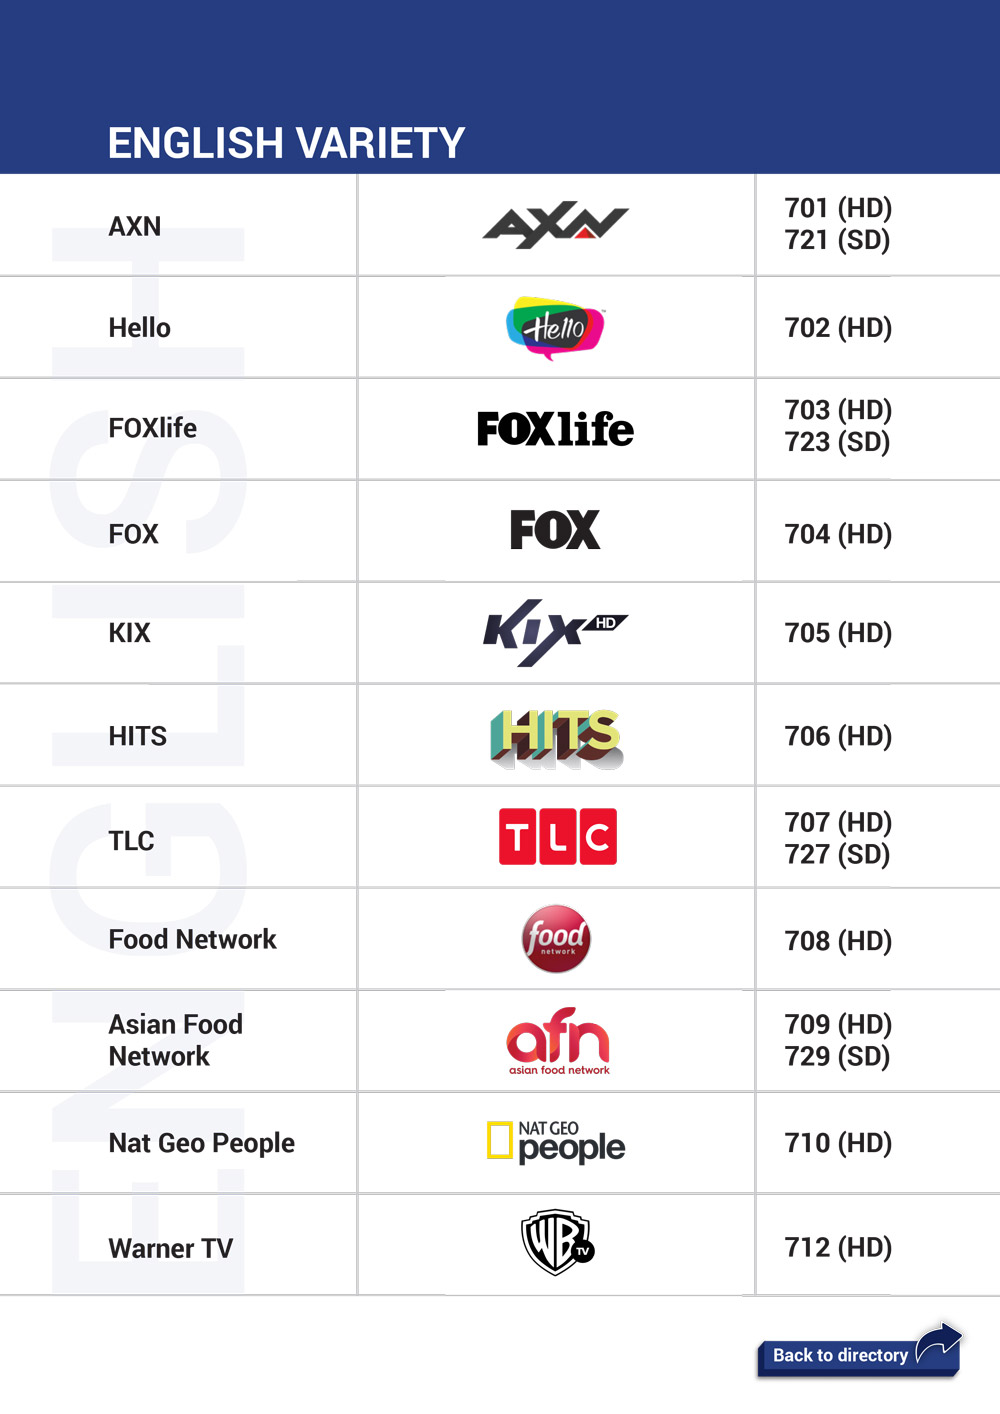 Astro is rearranging its channel numbers to prioritise HD channels